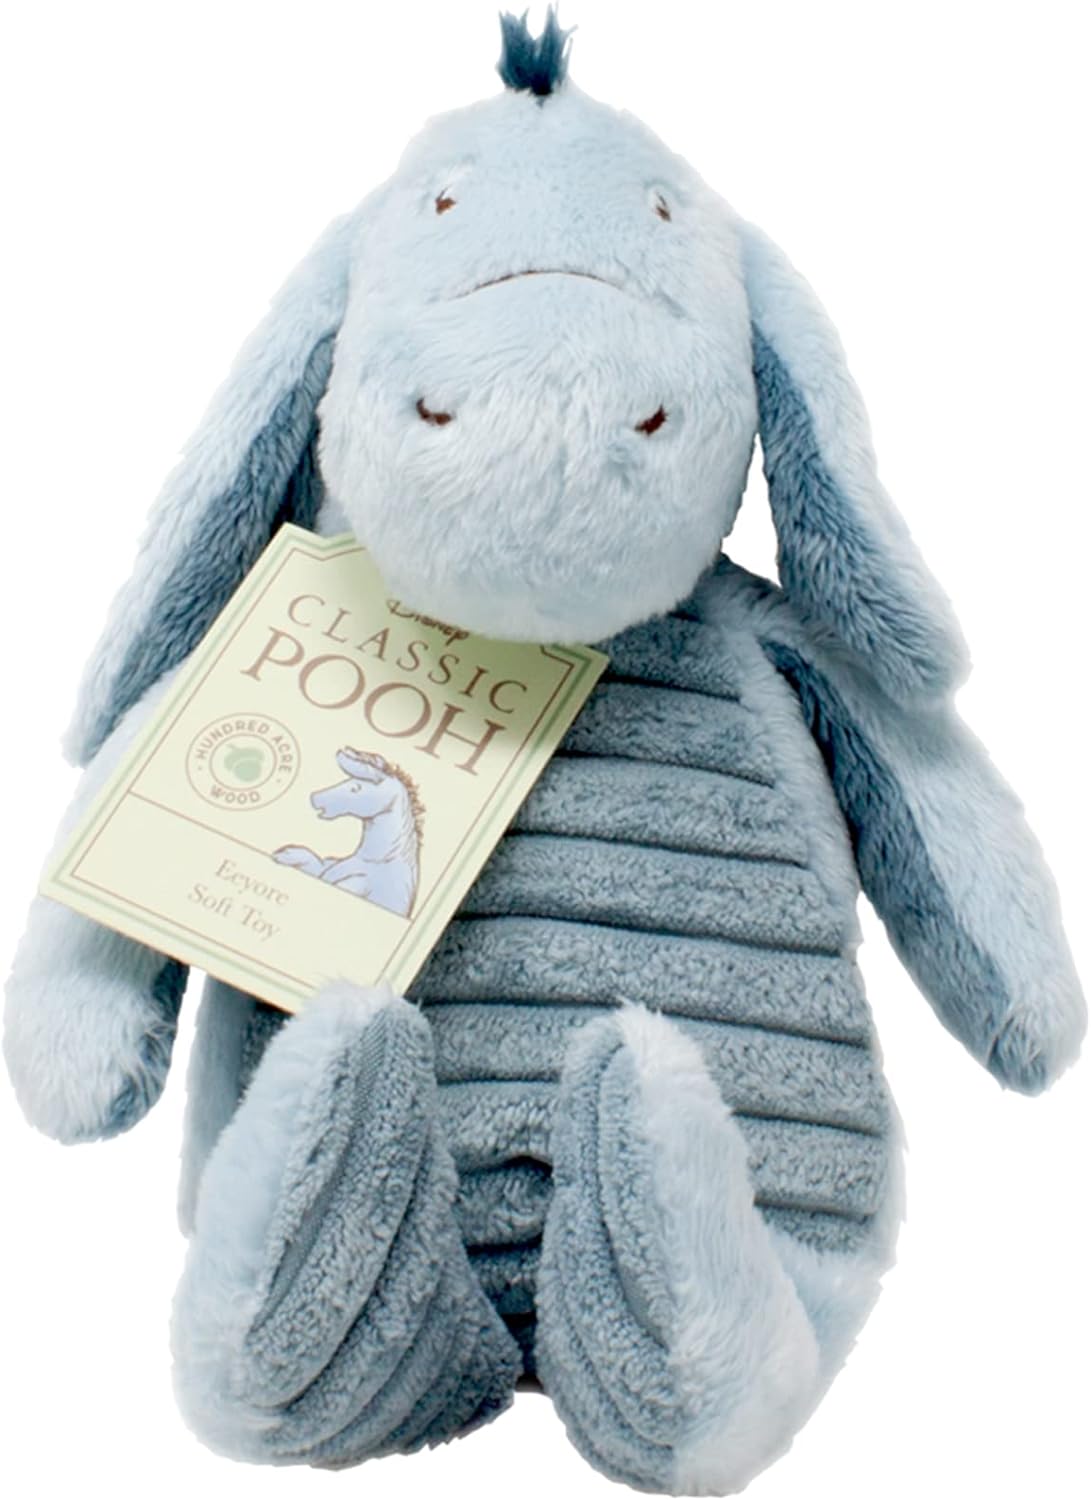 Classic Winnie the Pooh & Friends - Eeyore - Cuddly Donkey - Great as Gift for Newborn Baby, Children and Toddlers - Soft Toy by Rainbow Designs